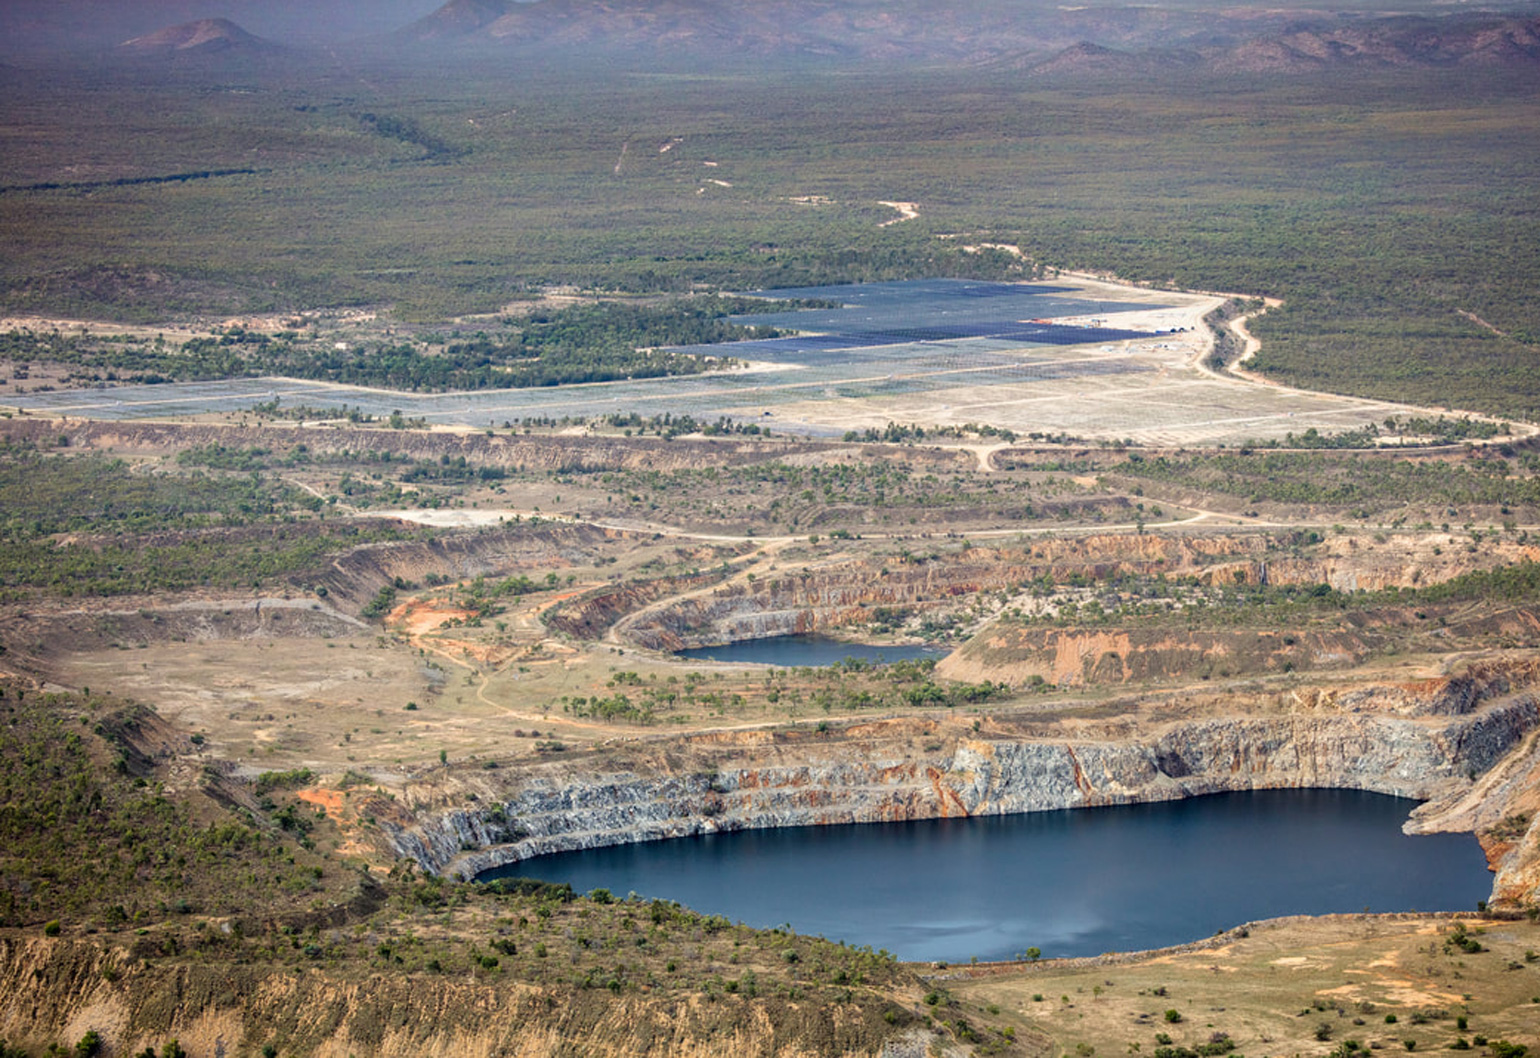 Kidston gold mine is transformed into a hybrid solar and pumped hydro renewable energy project